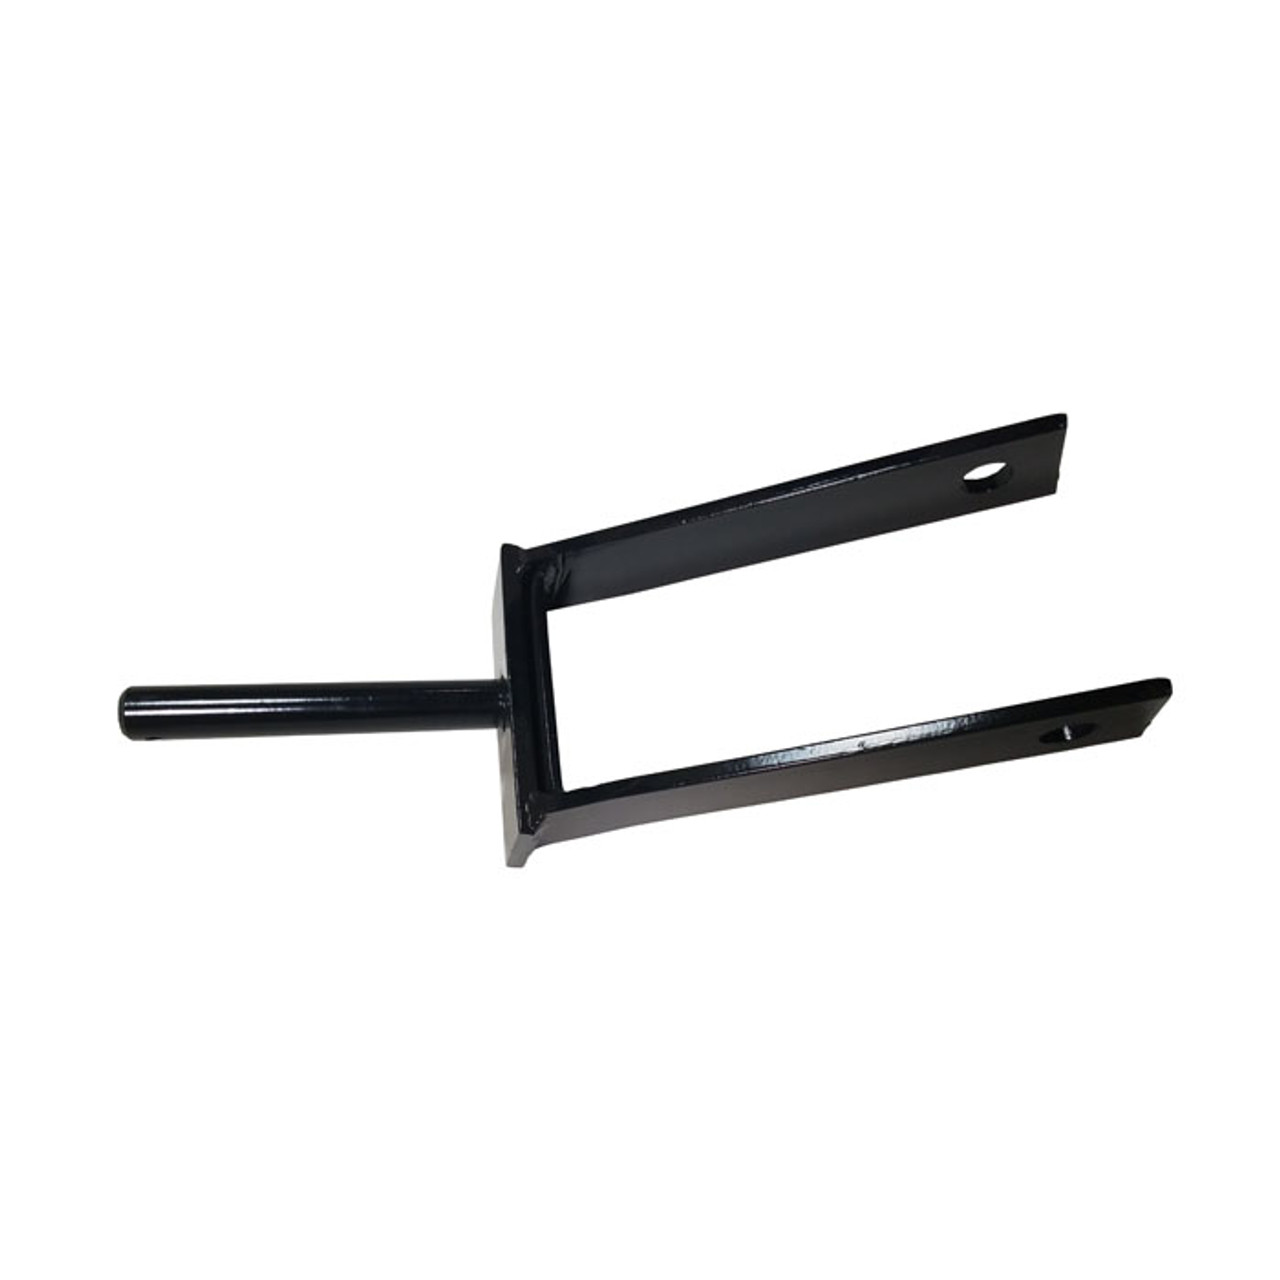 Tailwheel Fork For XL Mowers